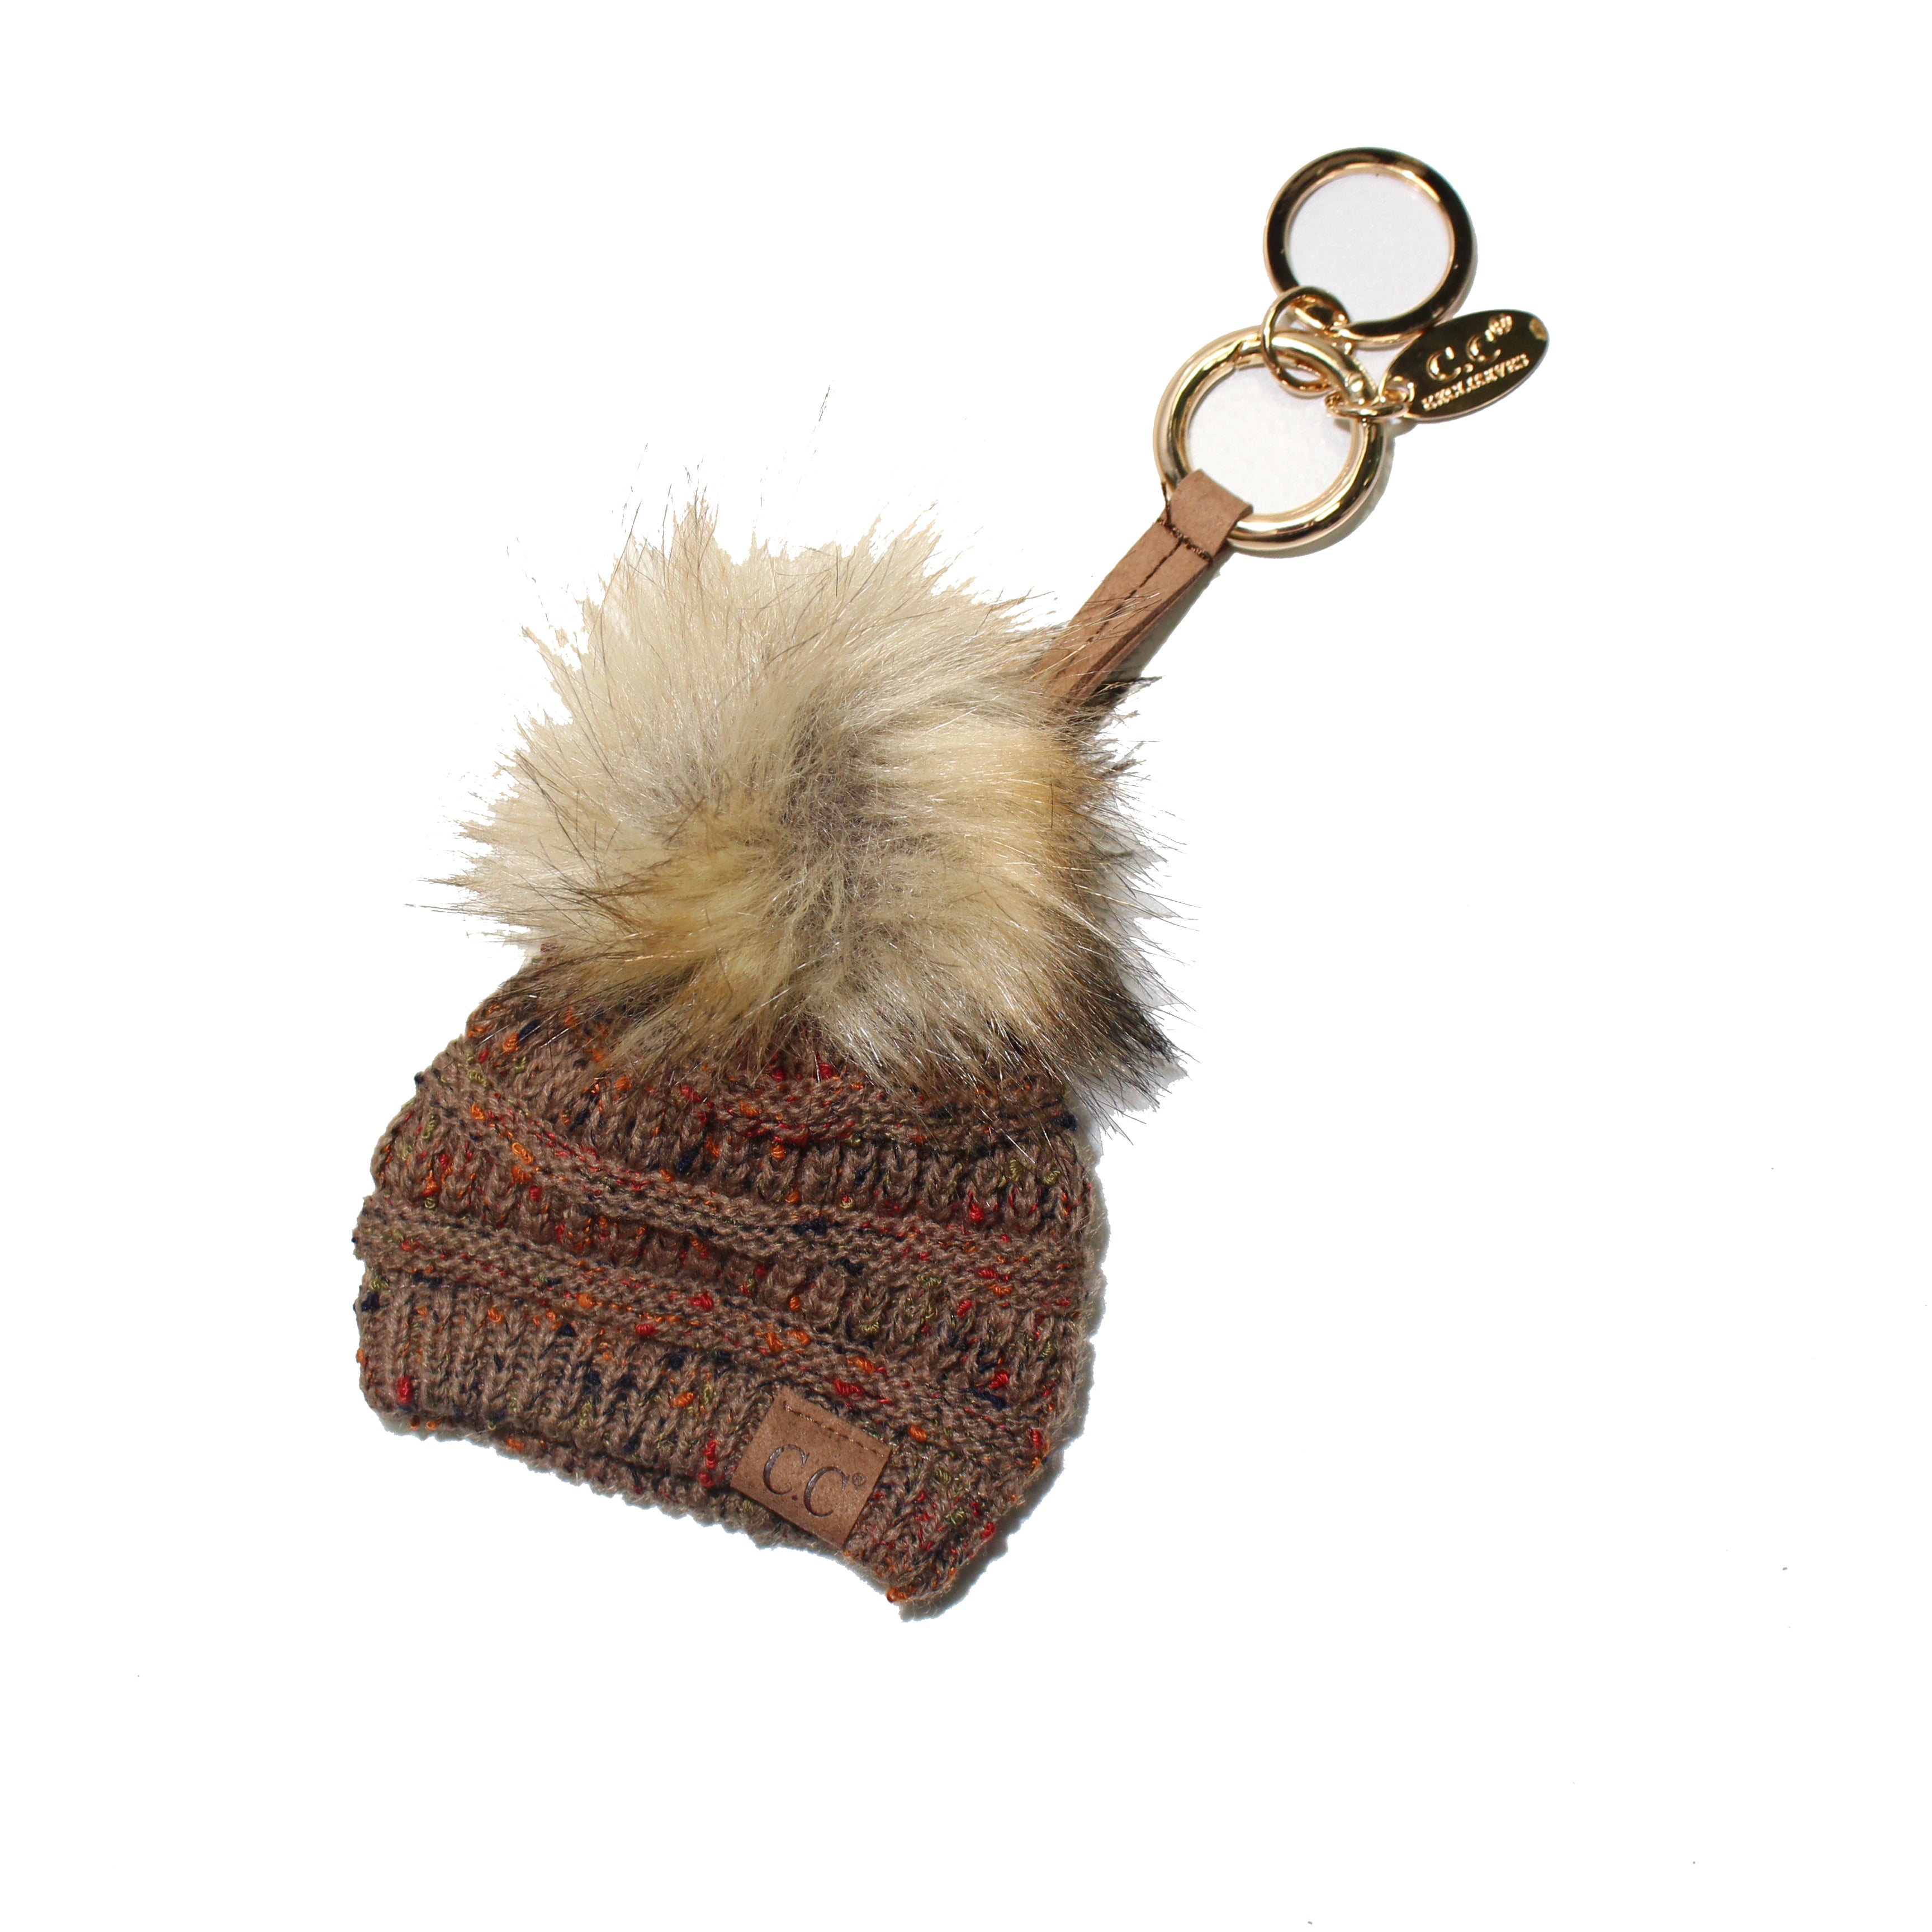 KB-33 Taupe Speckled Beanie Keychain